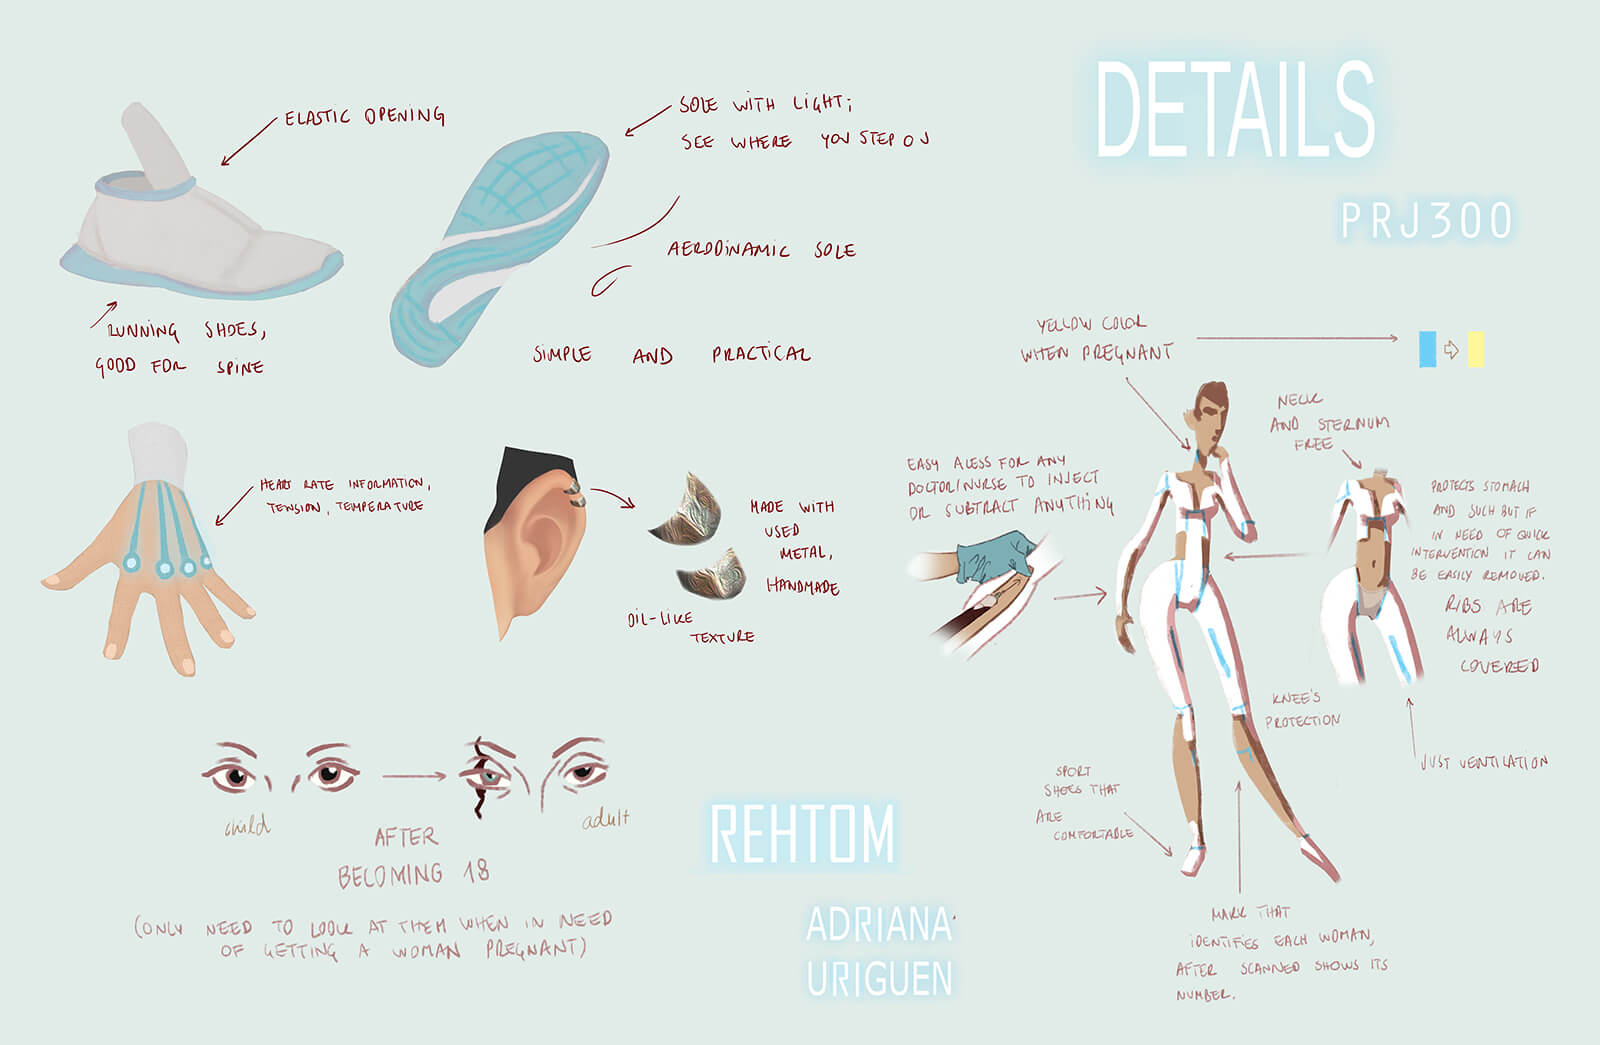 Color details for a futuristic character in the film REA, from shoes, earrings, accent lighting, and scar